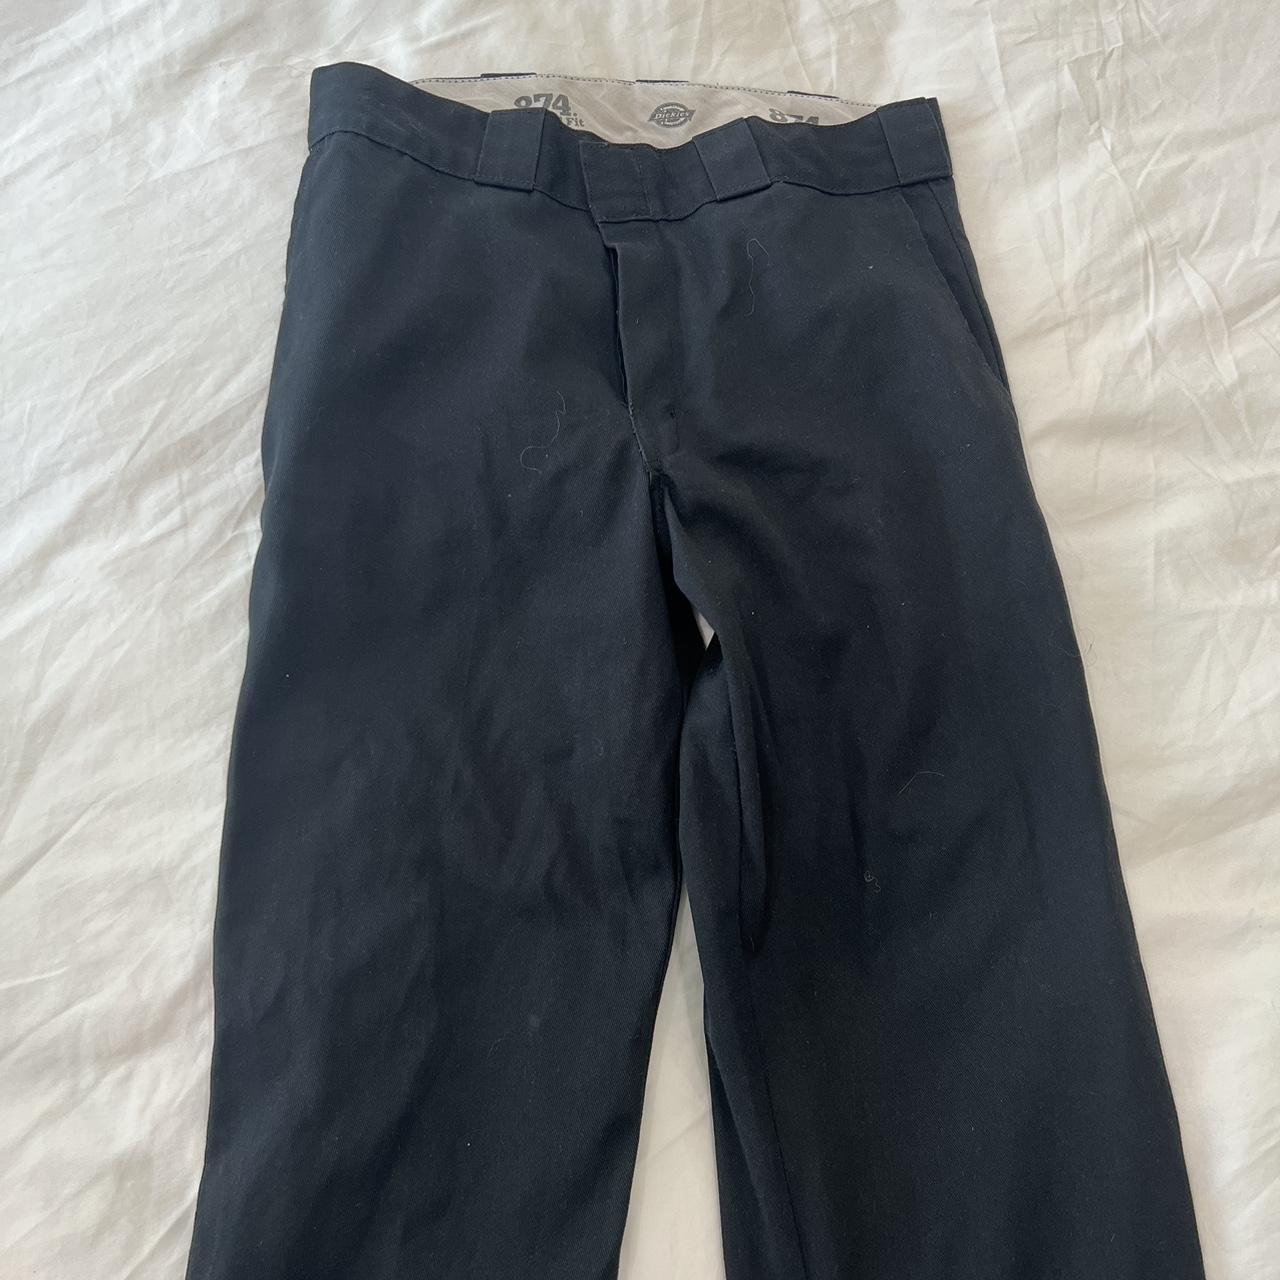 Dickies Black Cargo Pants - no listed size but... - Depop